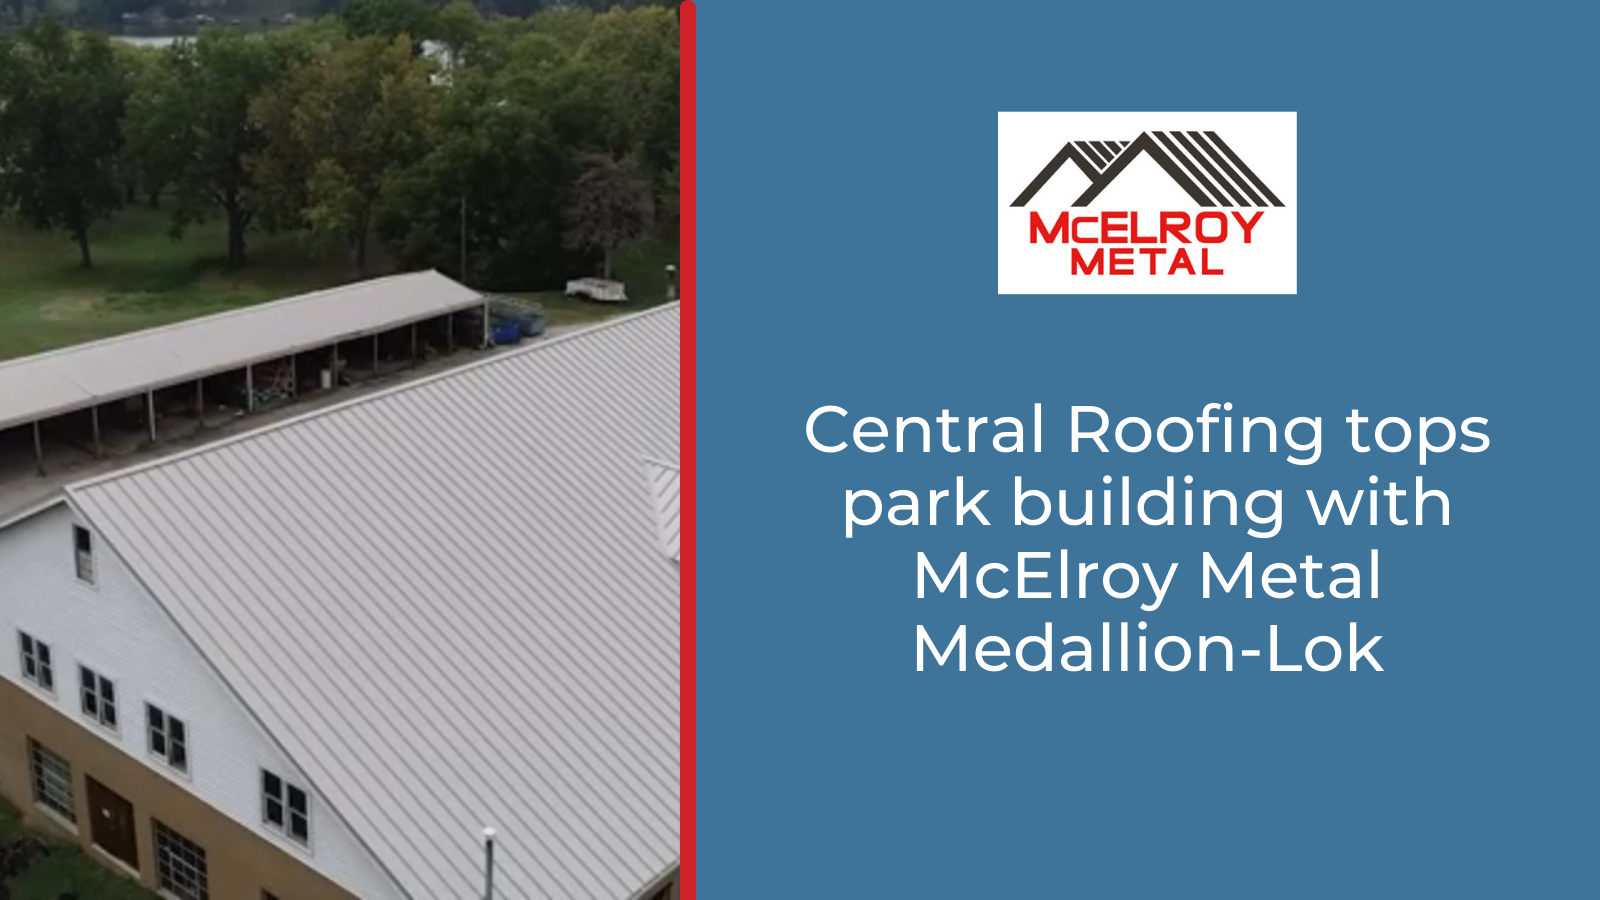 Central Roofing tops park building with McElroy Metal Medallion-Lok